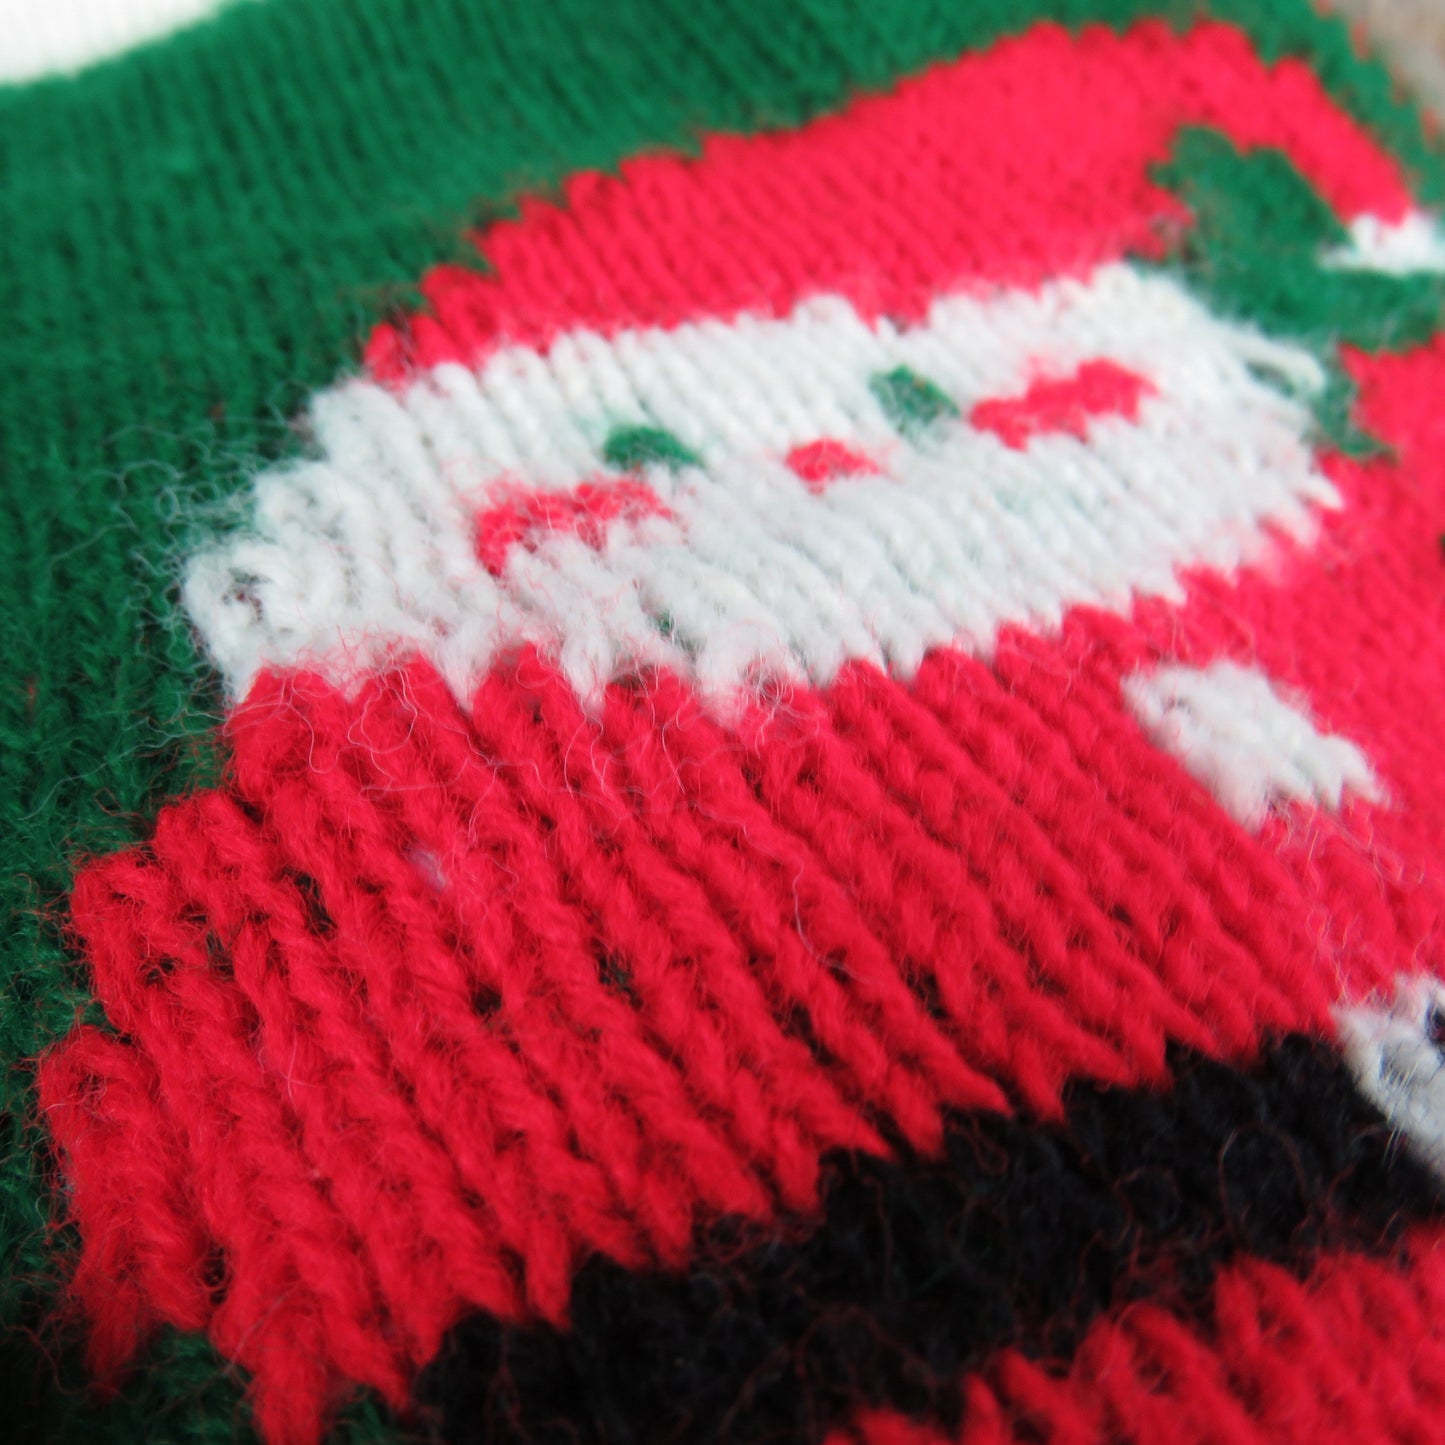 Vintage Santa Claus Knit Stocking Christmas Knitted GReen Red White Pom Pom